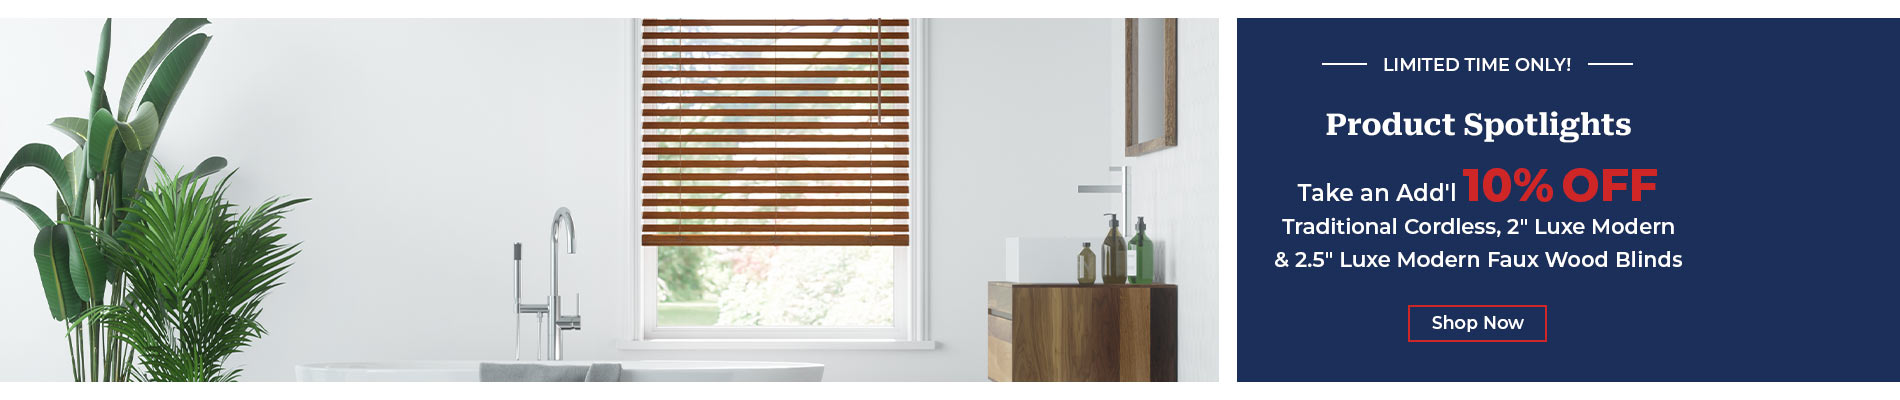 Additional 10% Off Traditional & Luxe Modern Faux Wood Blinds